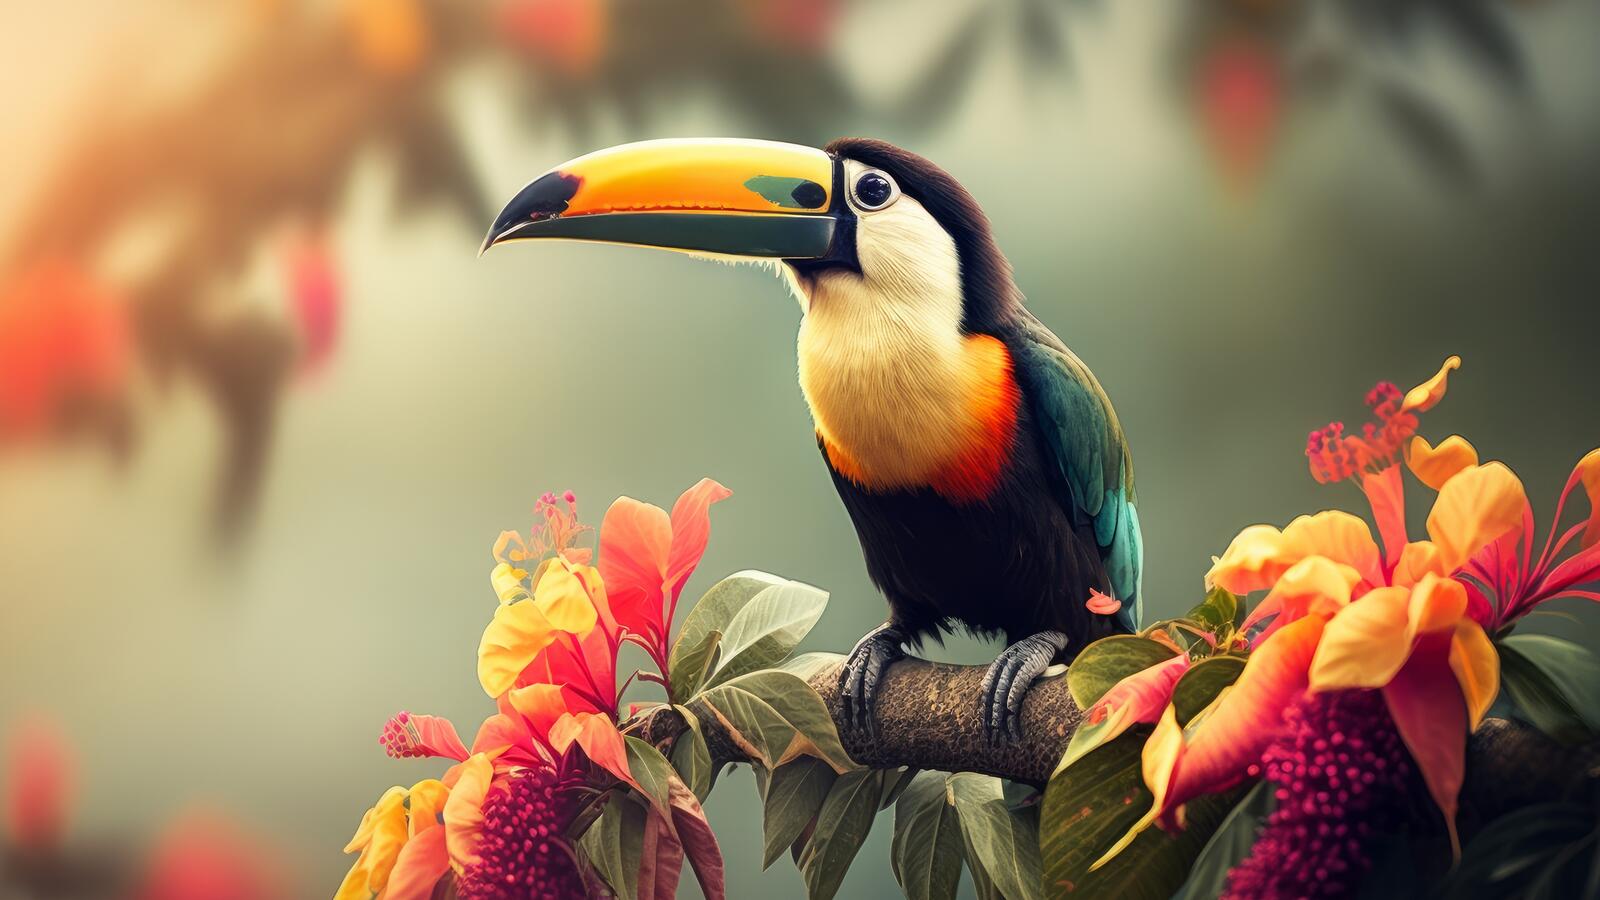 Free photo The toucan bird sits on a branch with flowers